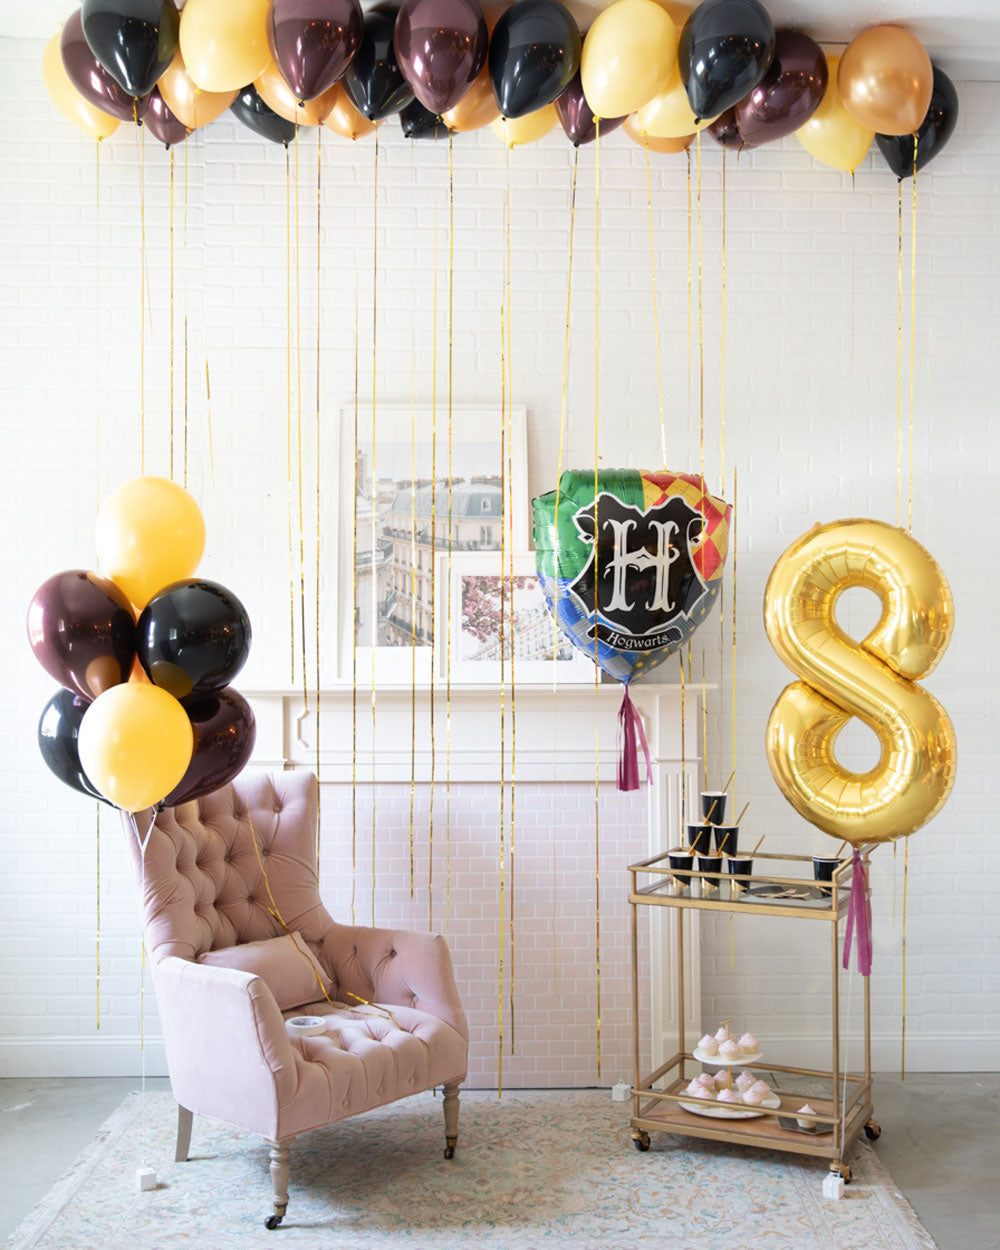 This weekends Harry Potter themed - Little B's Balloons